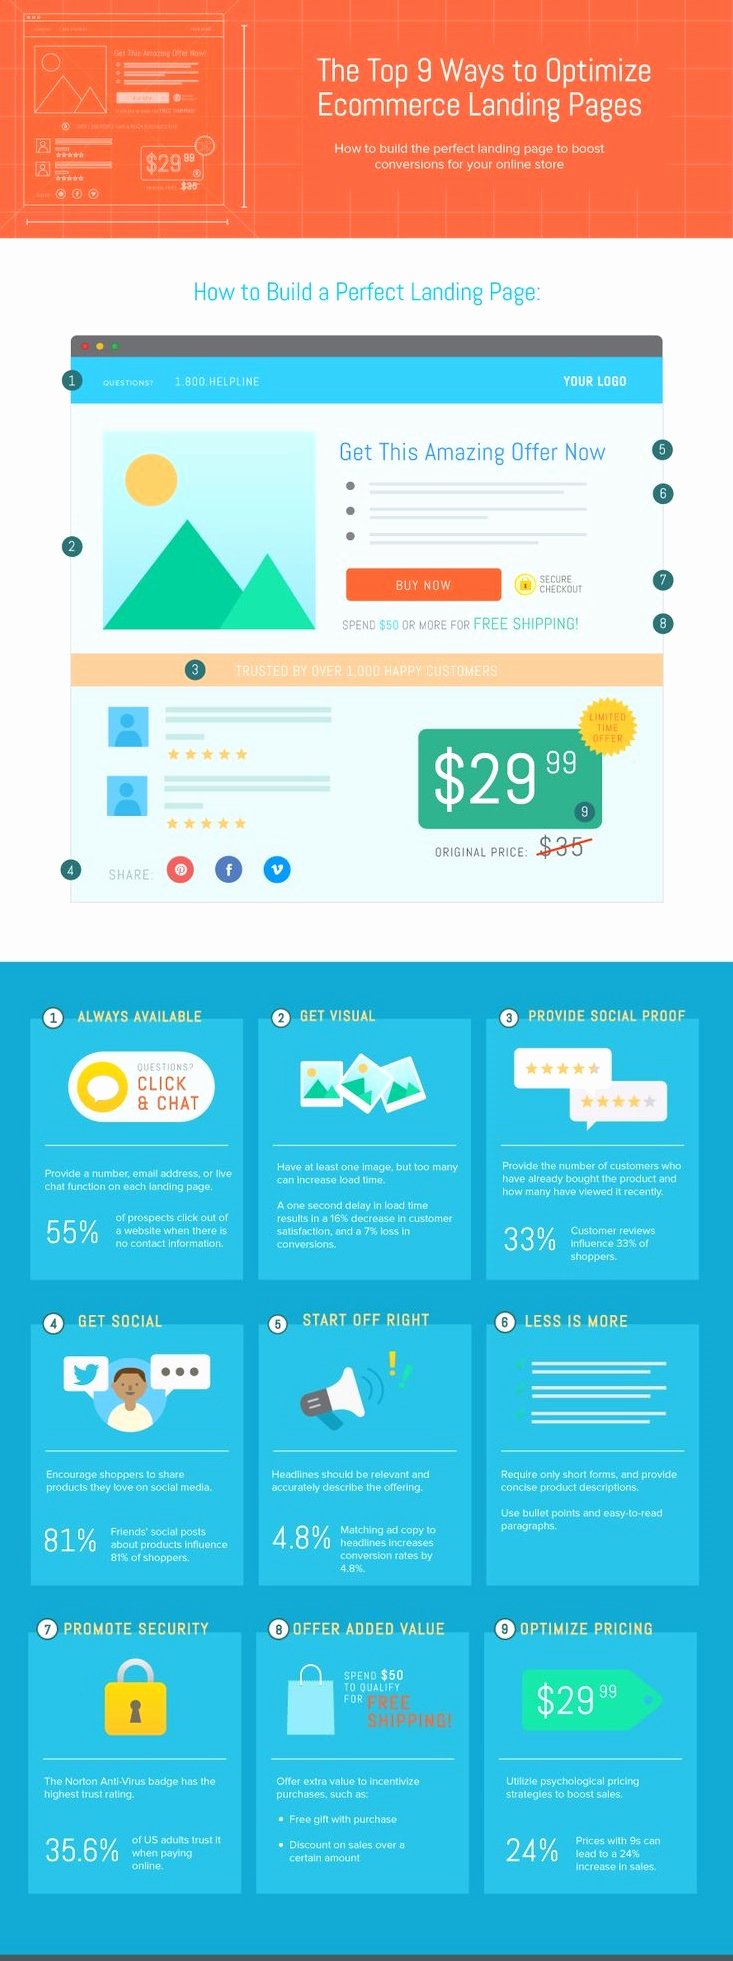 Ecommerce Marketing Plan Template Elegant E Merce Marketing Strategy Template for Small Businesses